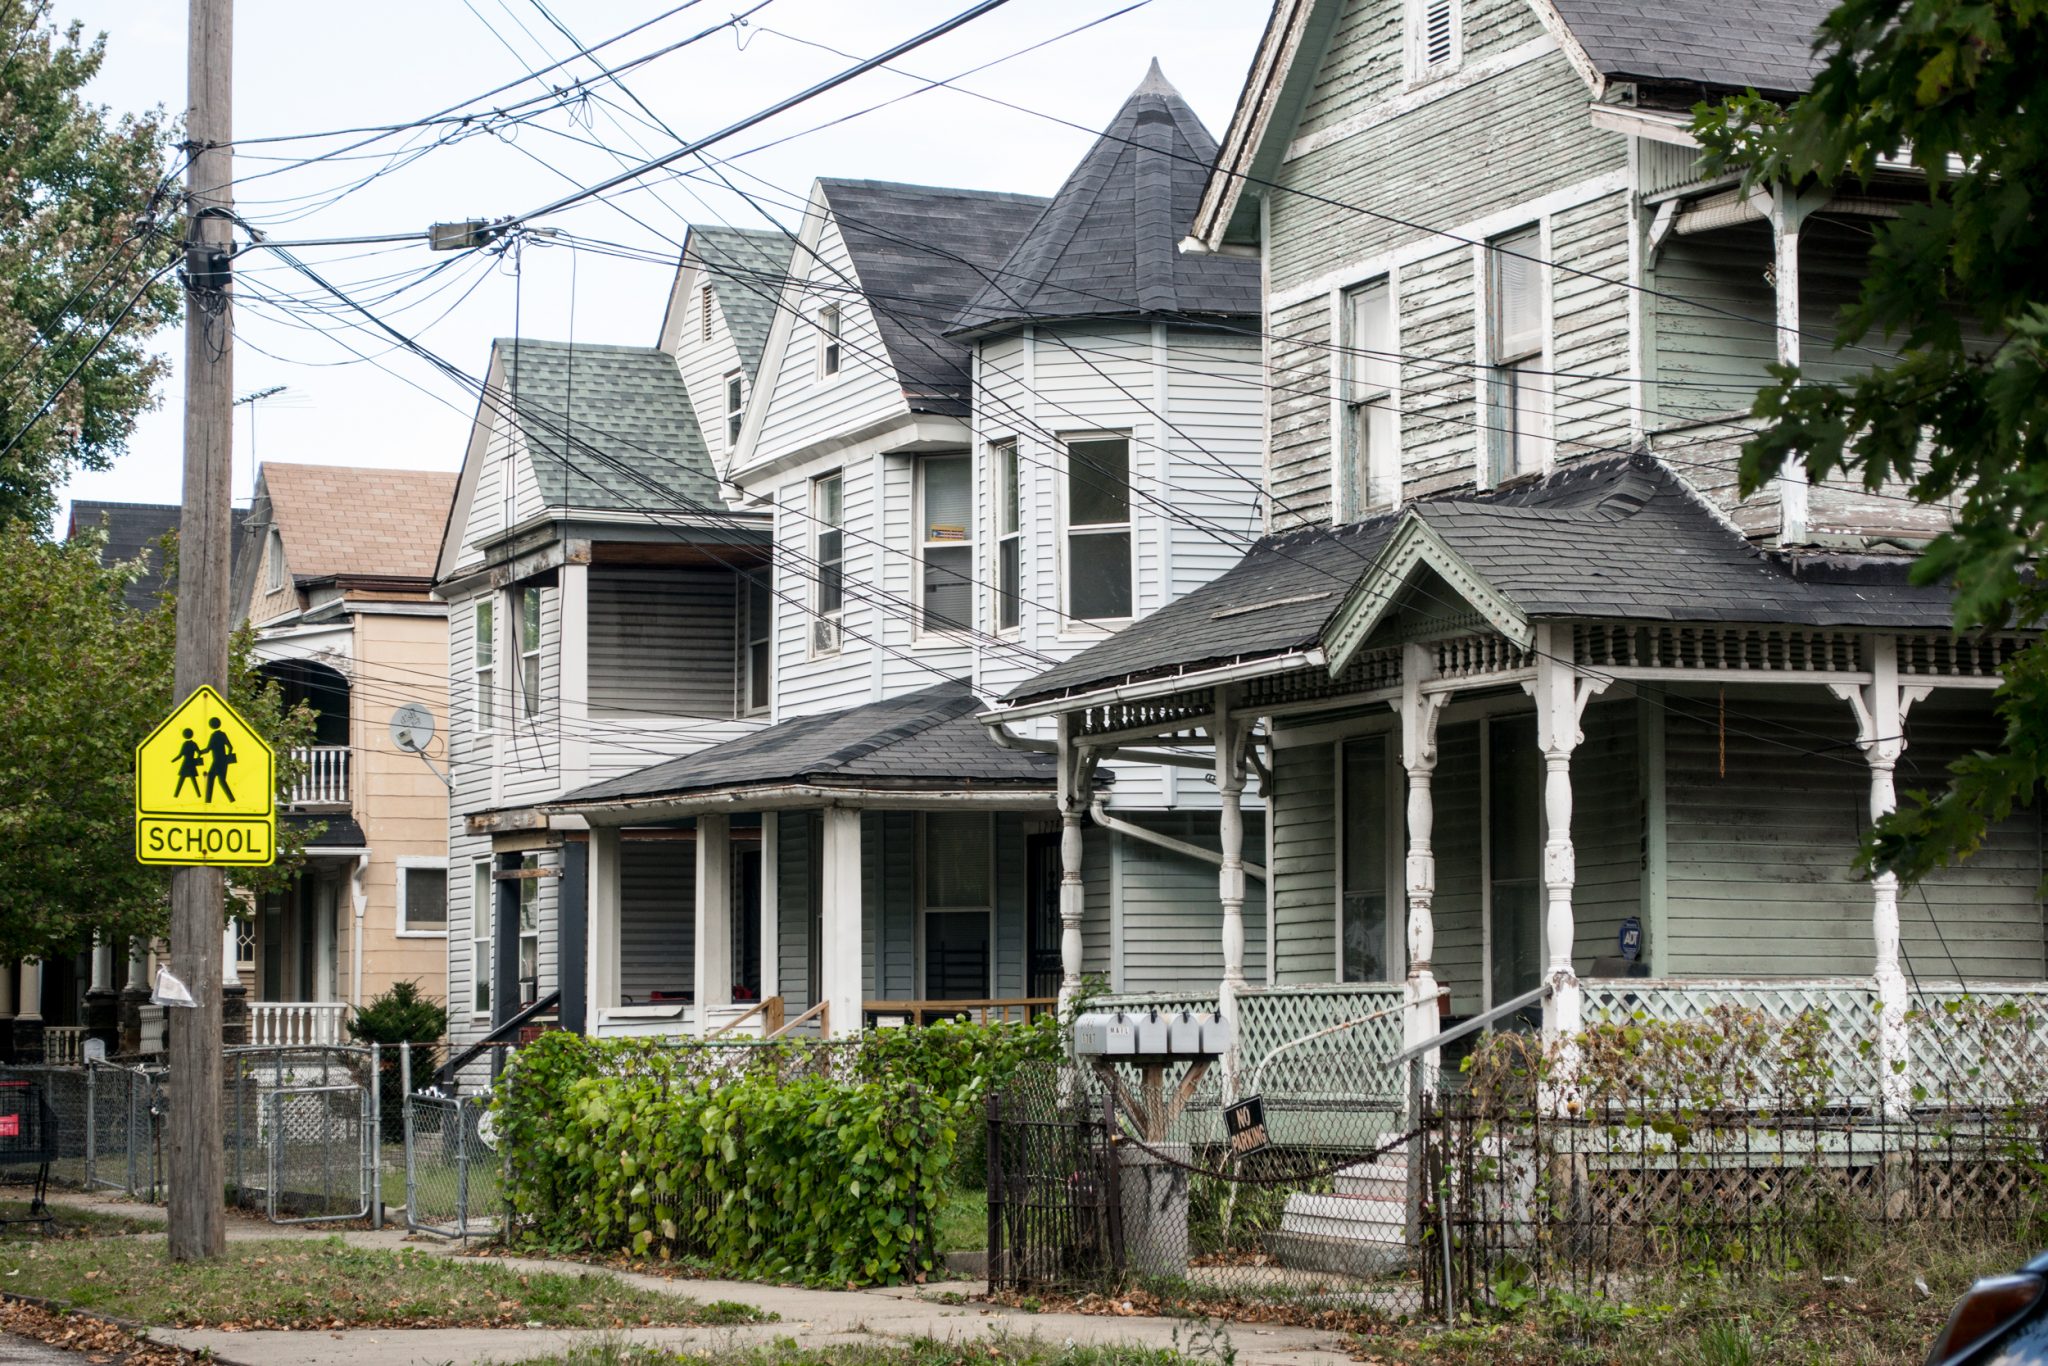 Cleveland could soon ban source of discrimination Fair Housing